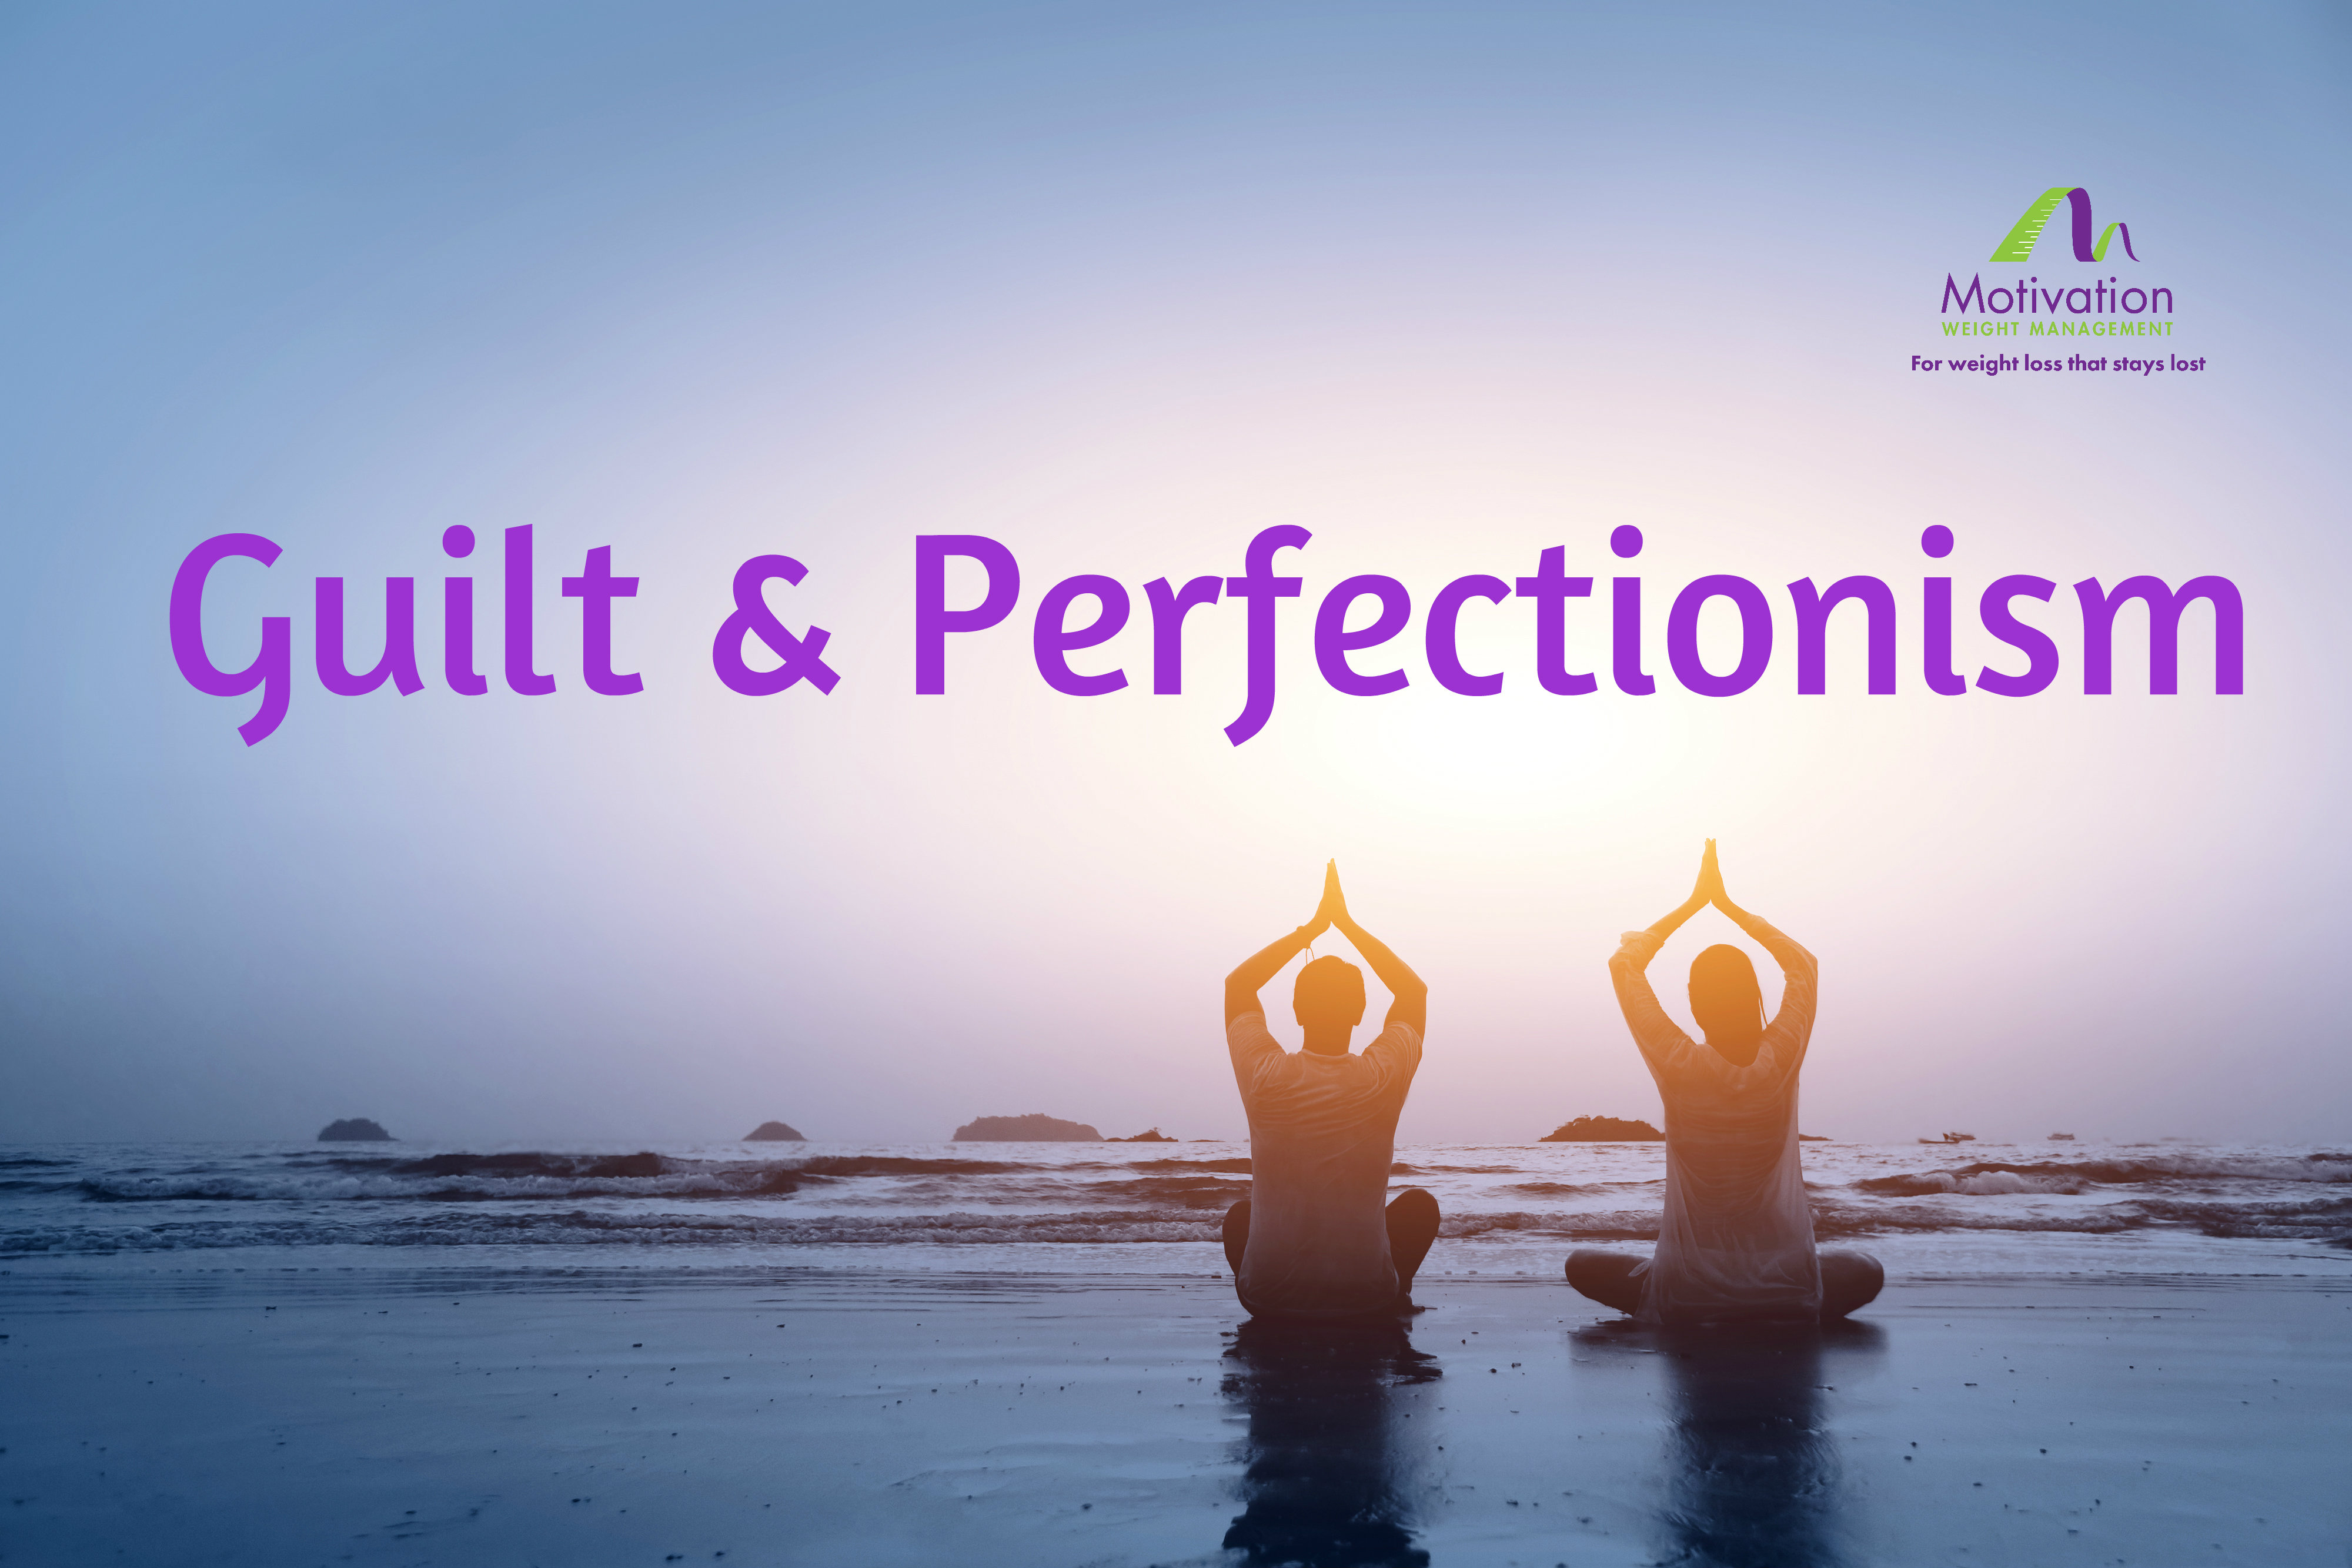 Day 8 Guilt & Perfectionism